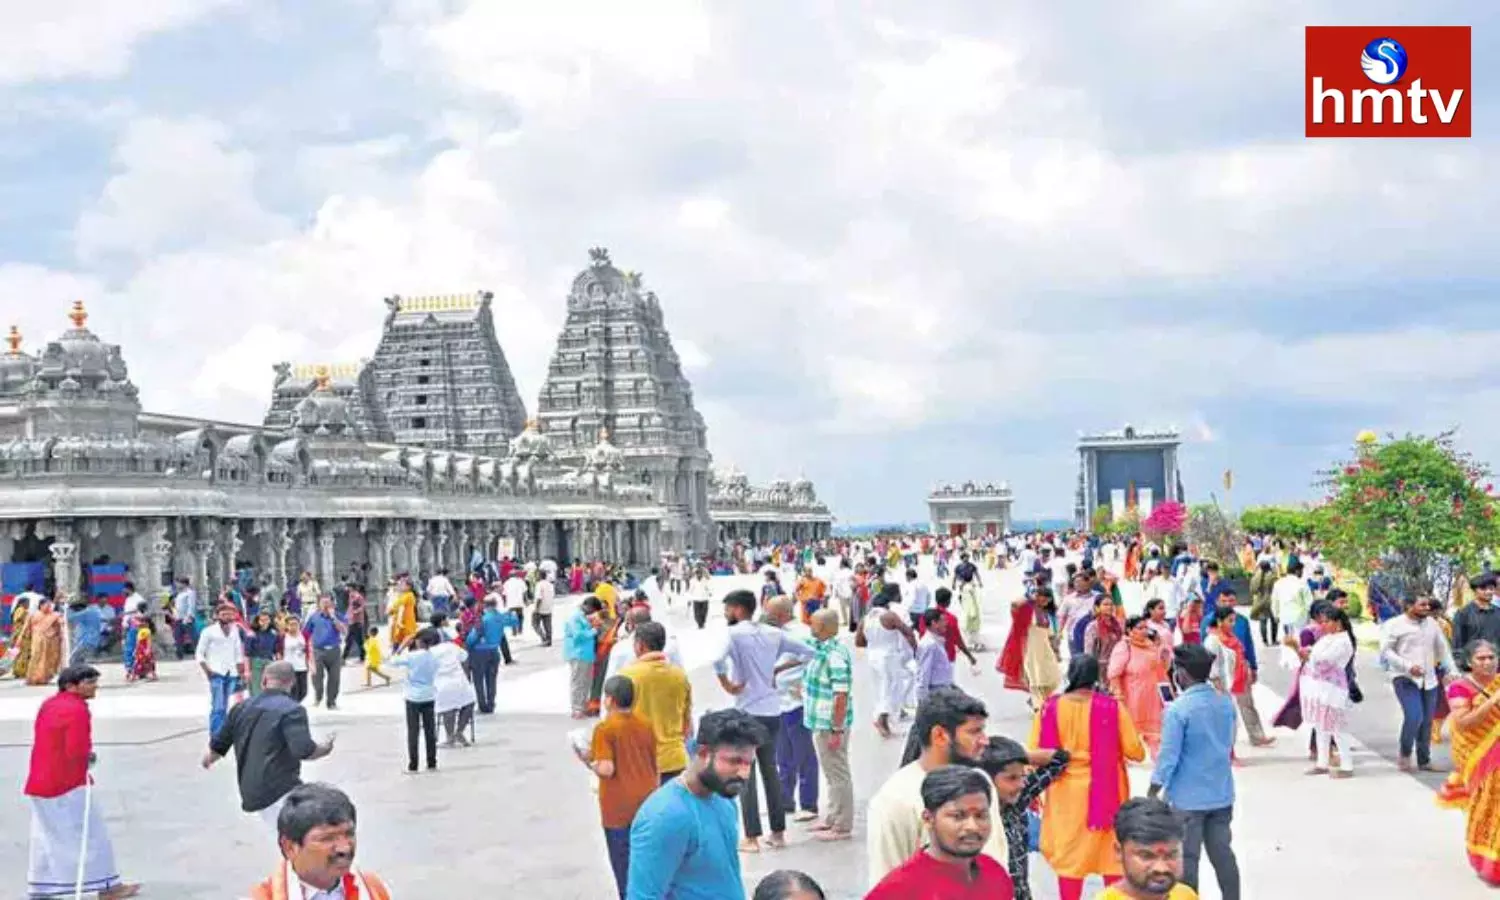 CM KCR Praises On Yadadri Temple After Temple Win Green Place Of Worship Award